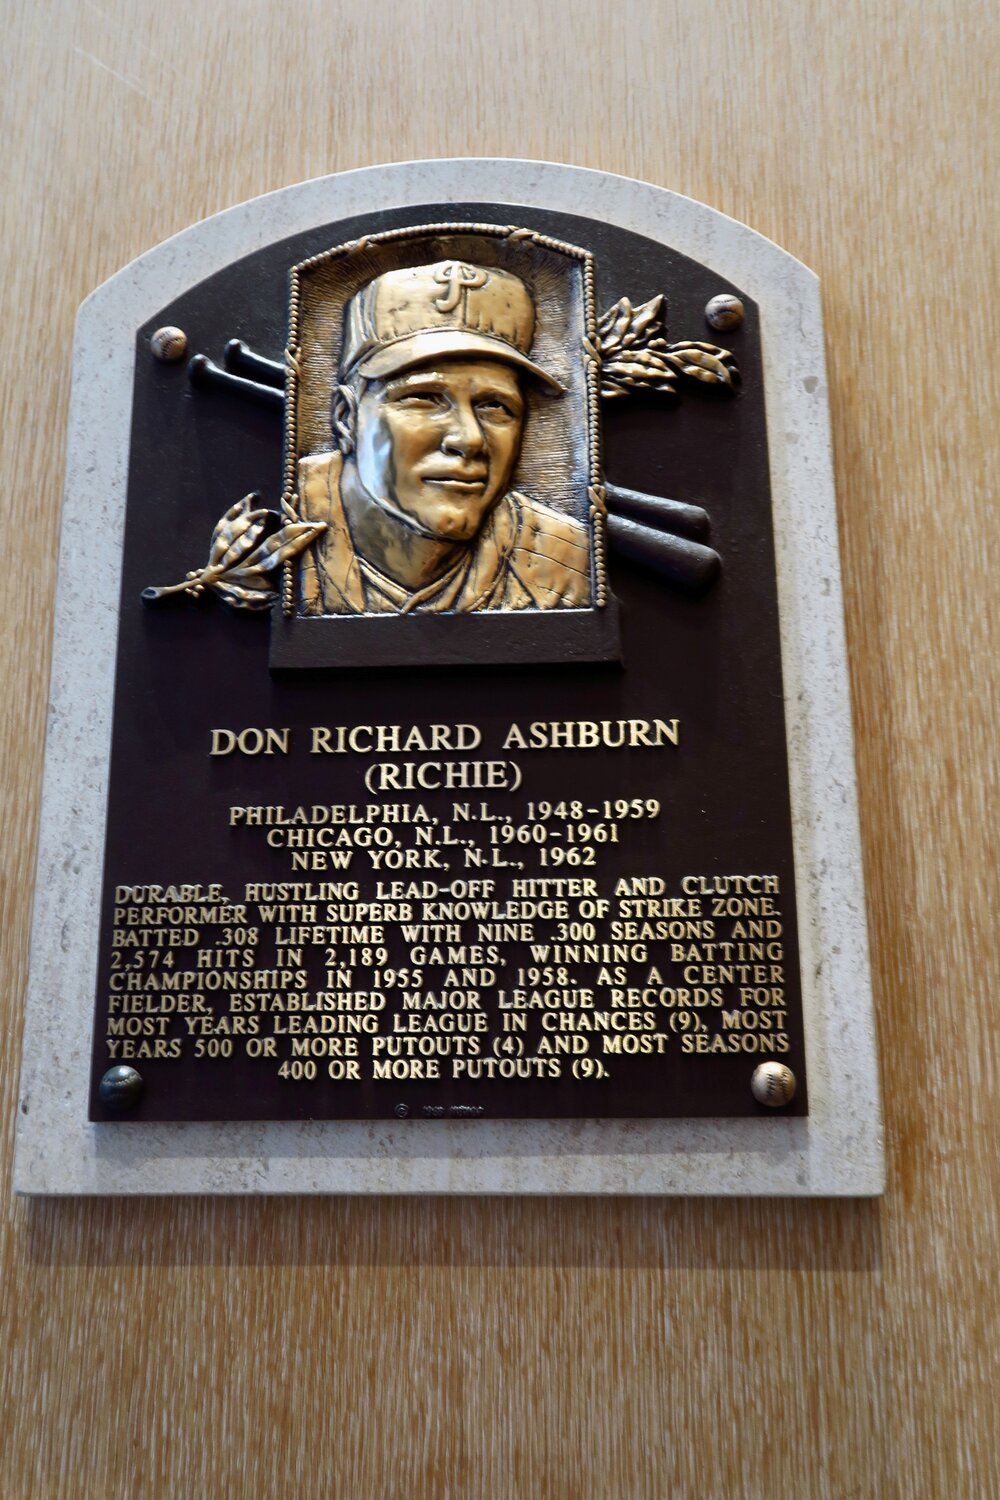 A plaque marking the induction of Richie Ashburn at the National Baseball Hall of Fame in Cooperstown. “Whitey” played for the Phillies from 1948 to 1959 and added color commentary in the broadcast booth from 1963 until his death in 1997.